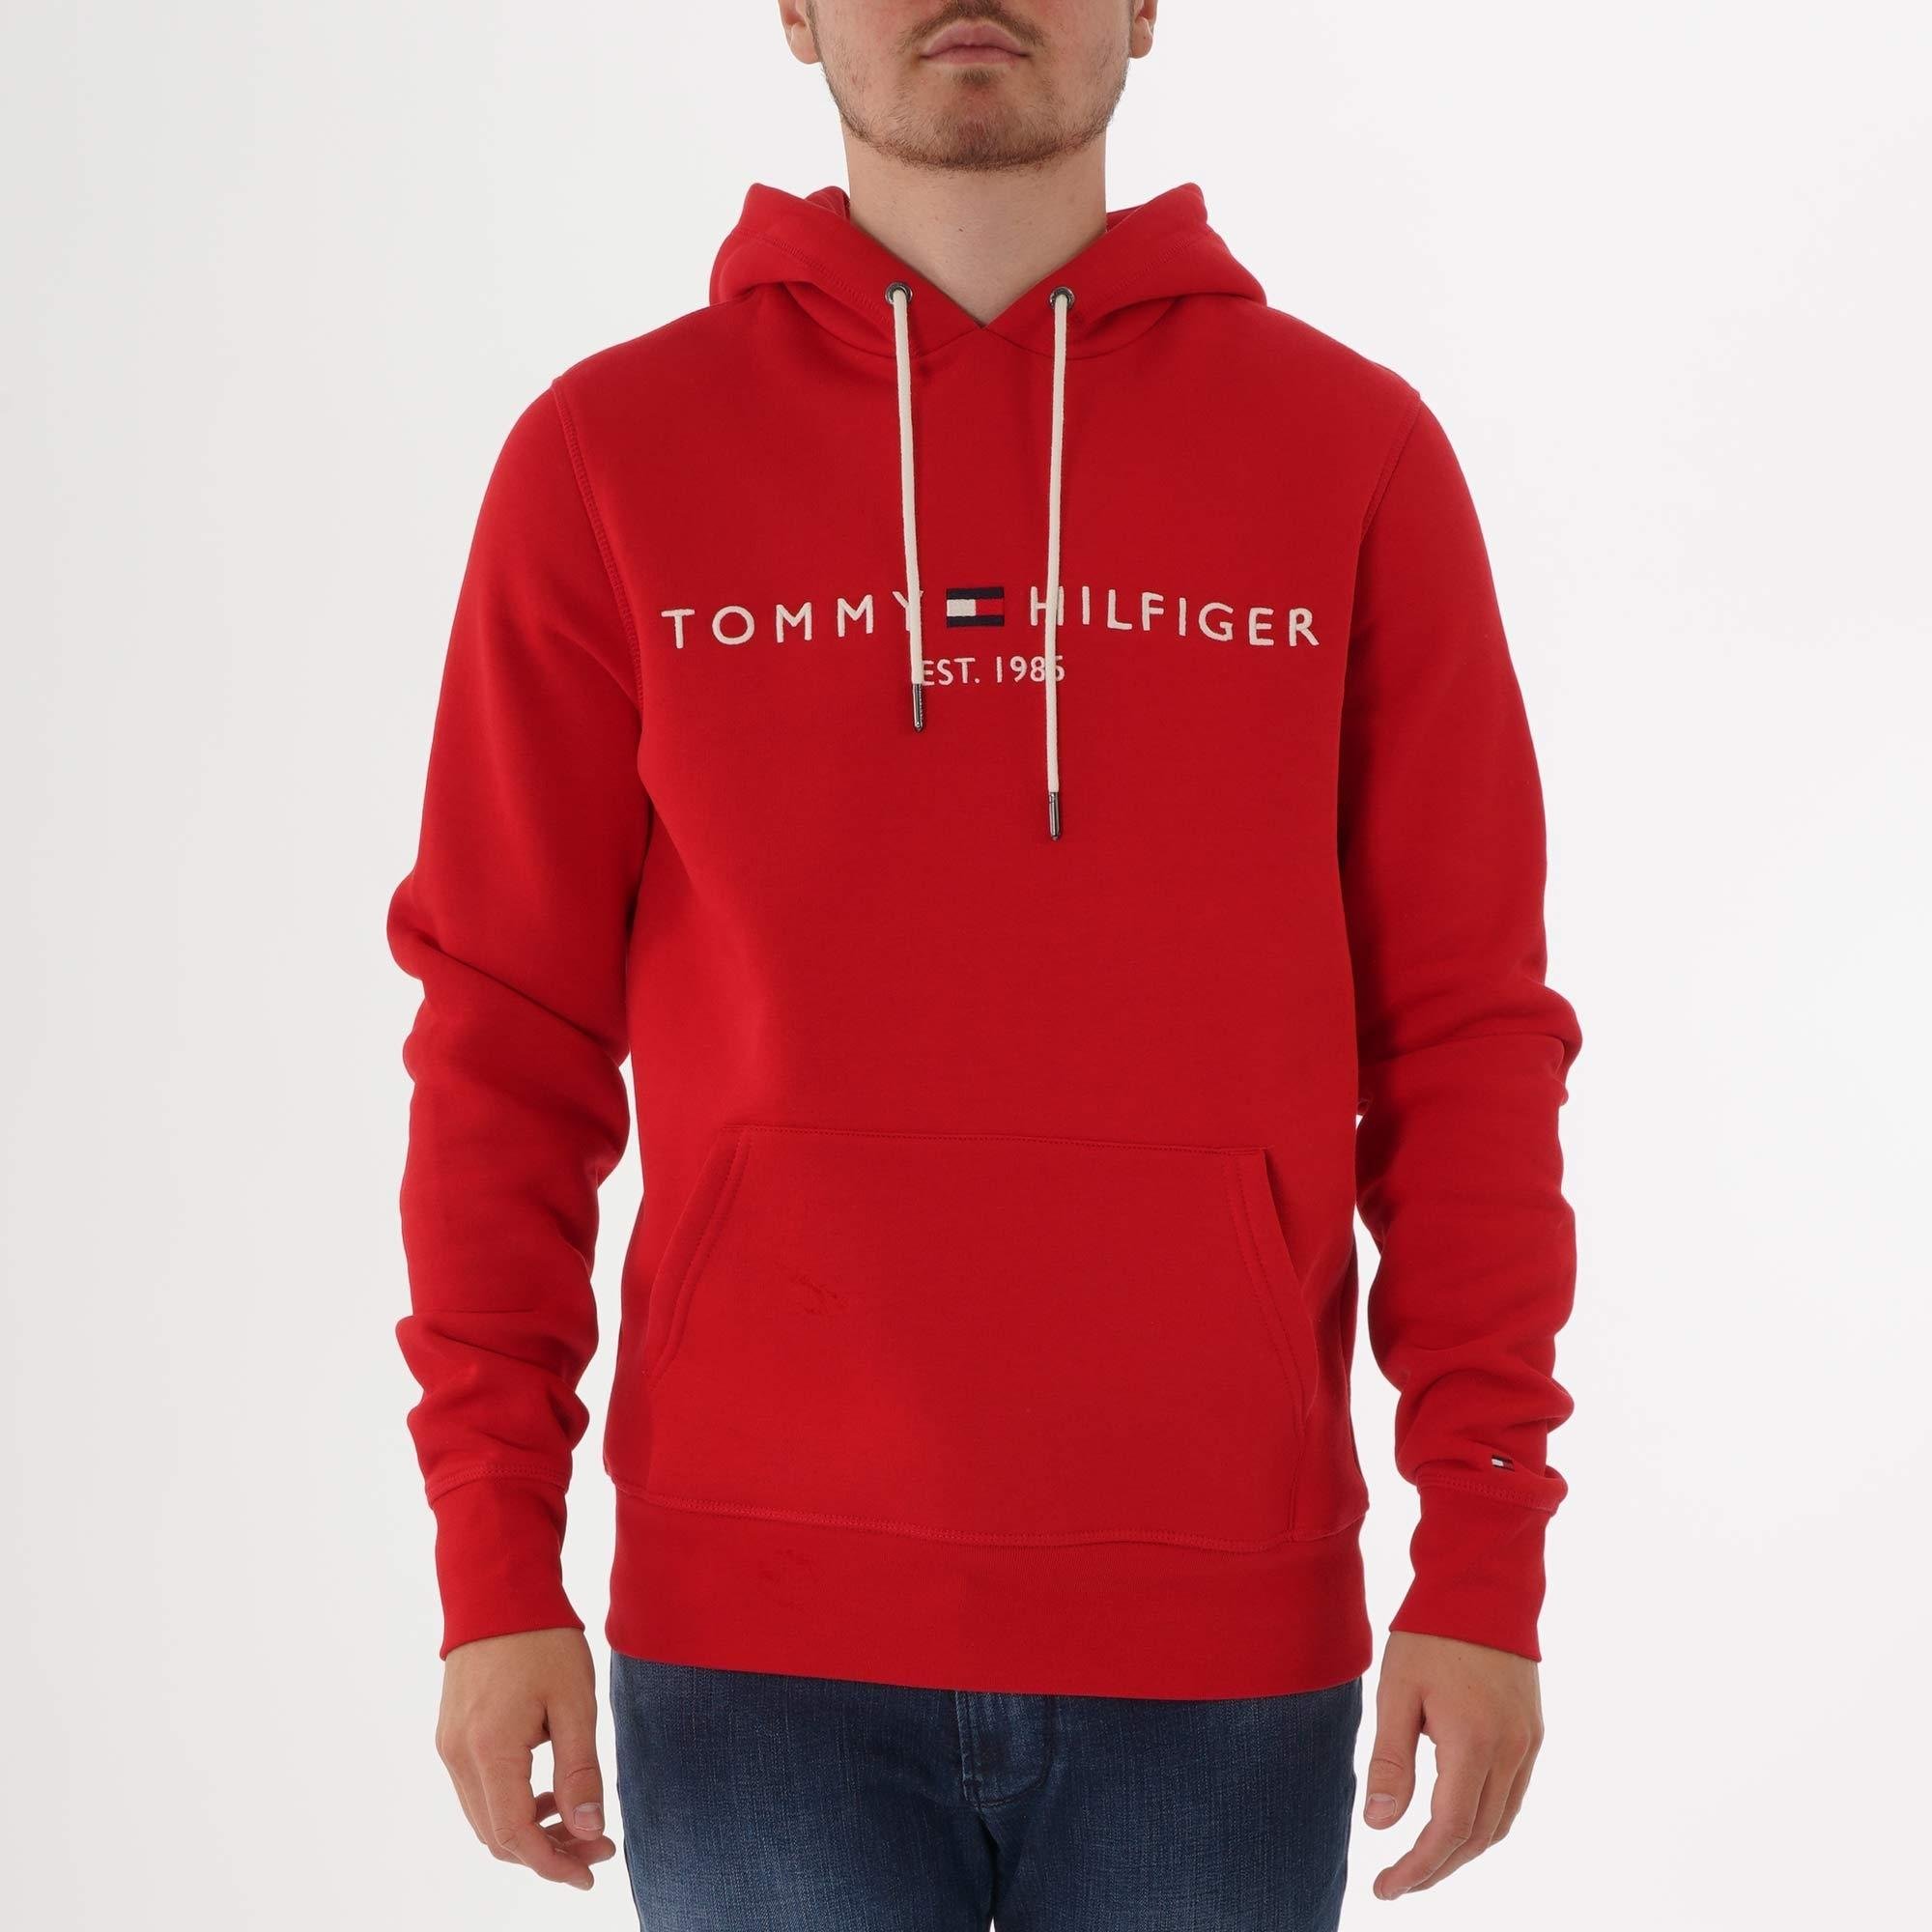 Tommy Hilfiger Red Hoodie Mens Factory Sale, SAVE 43% - mpgc.net